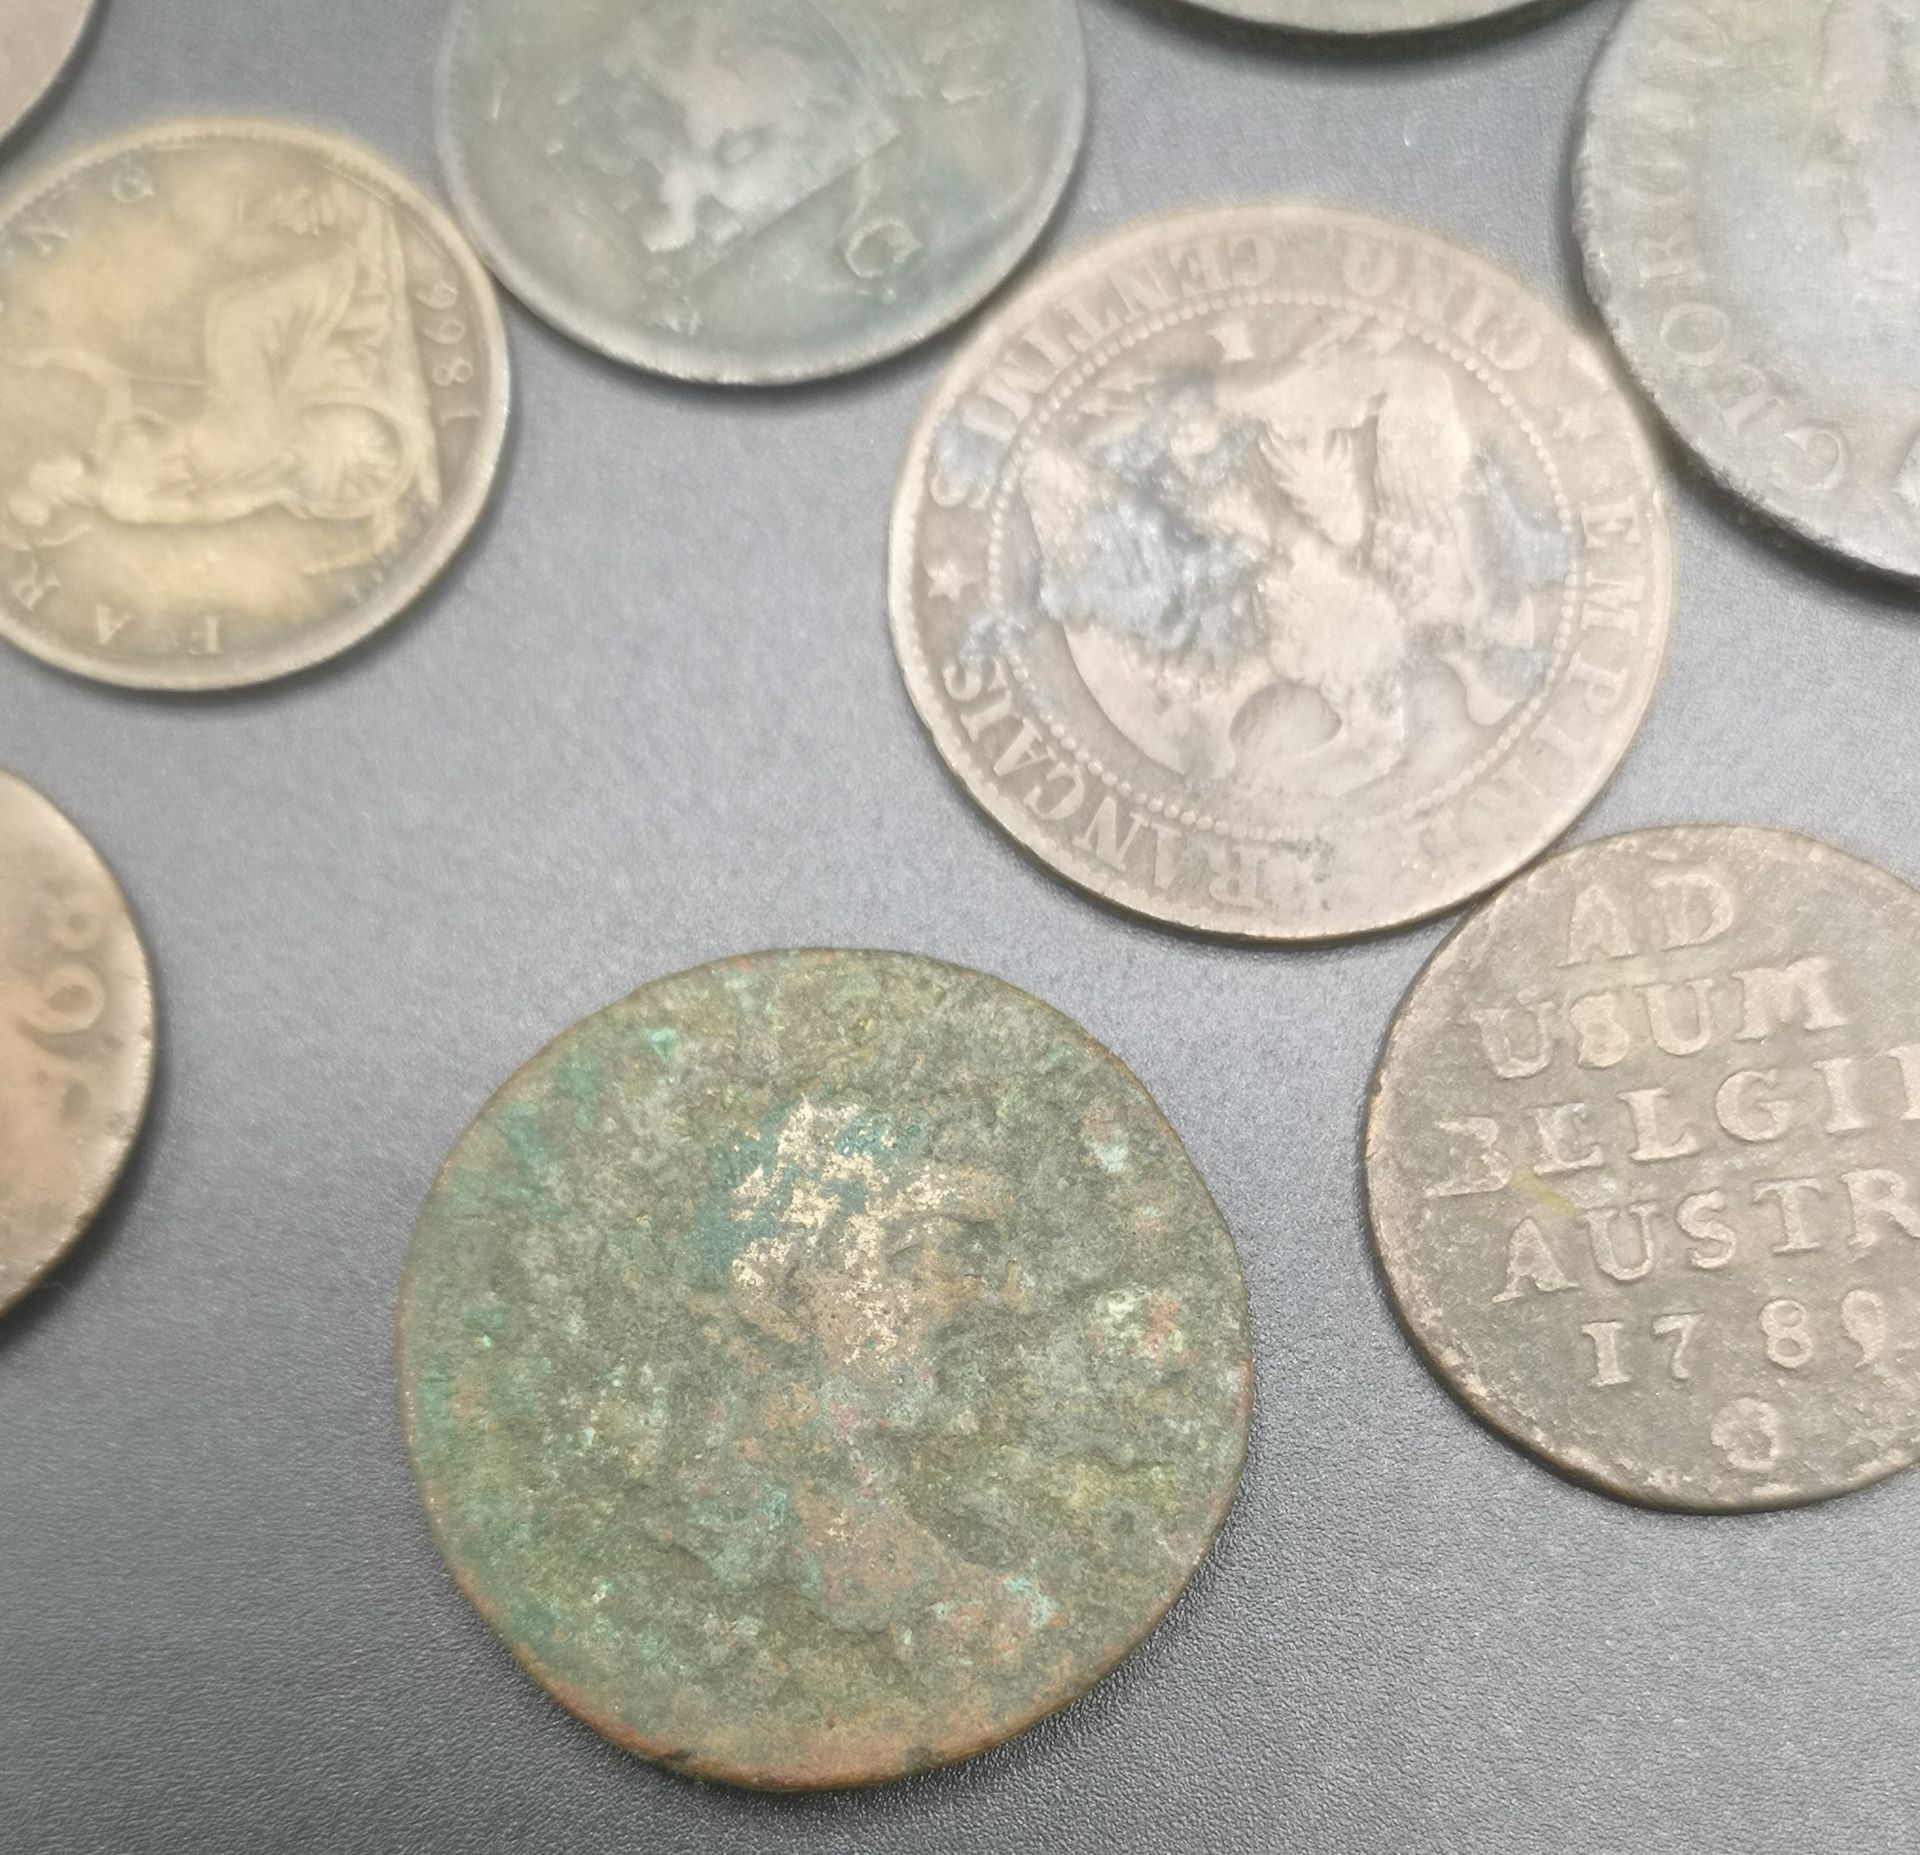 King George III "cartwheel" penny, 1797 and other GB and foreign copper coins - Image 8 of 10